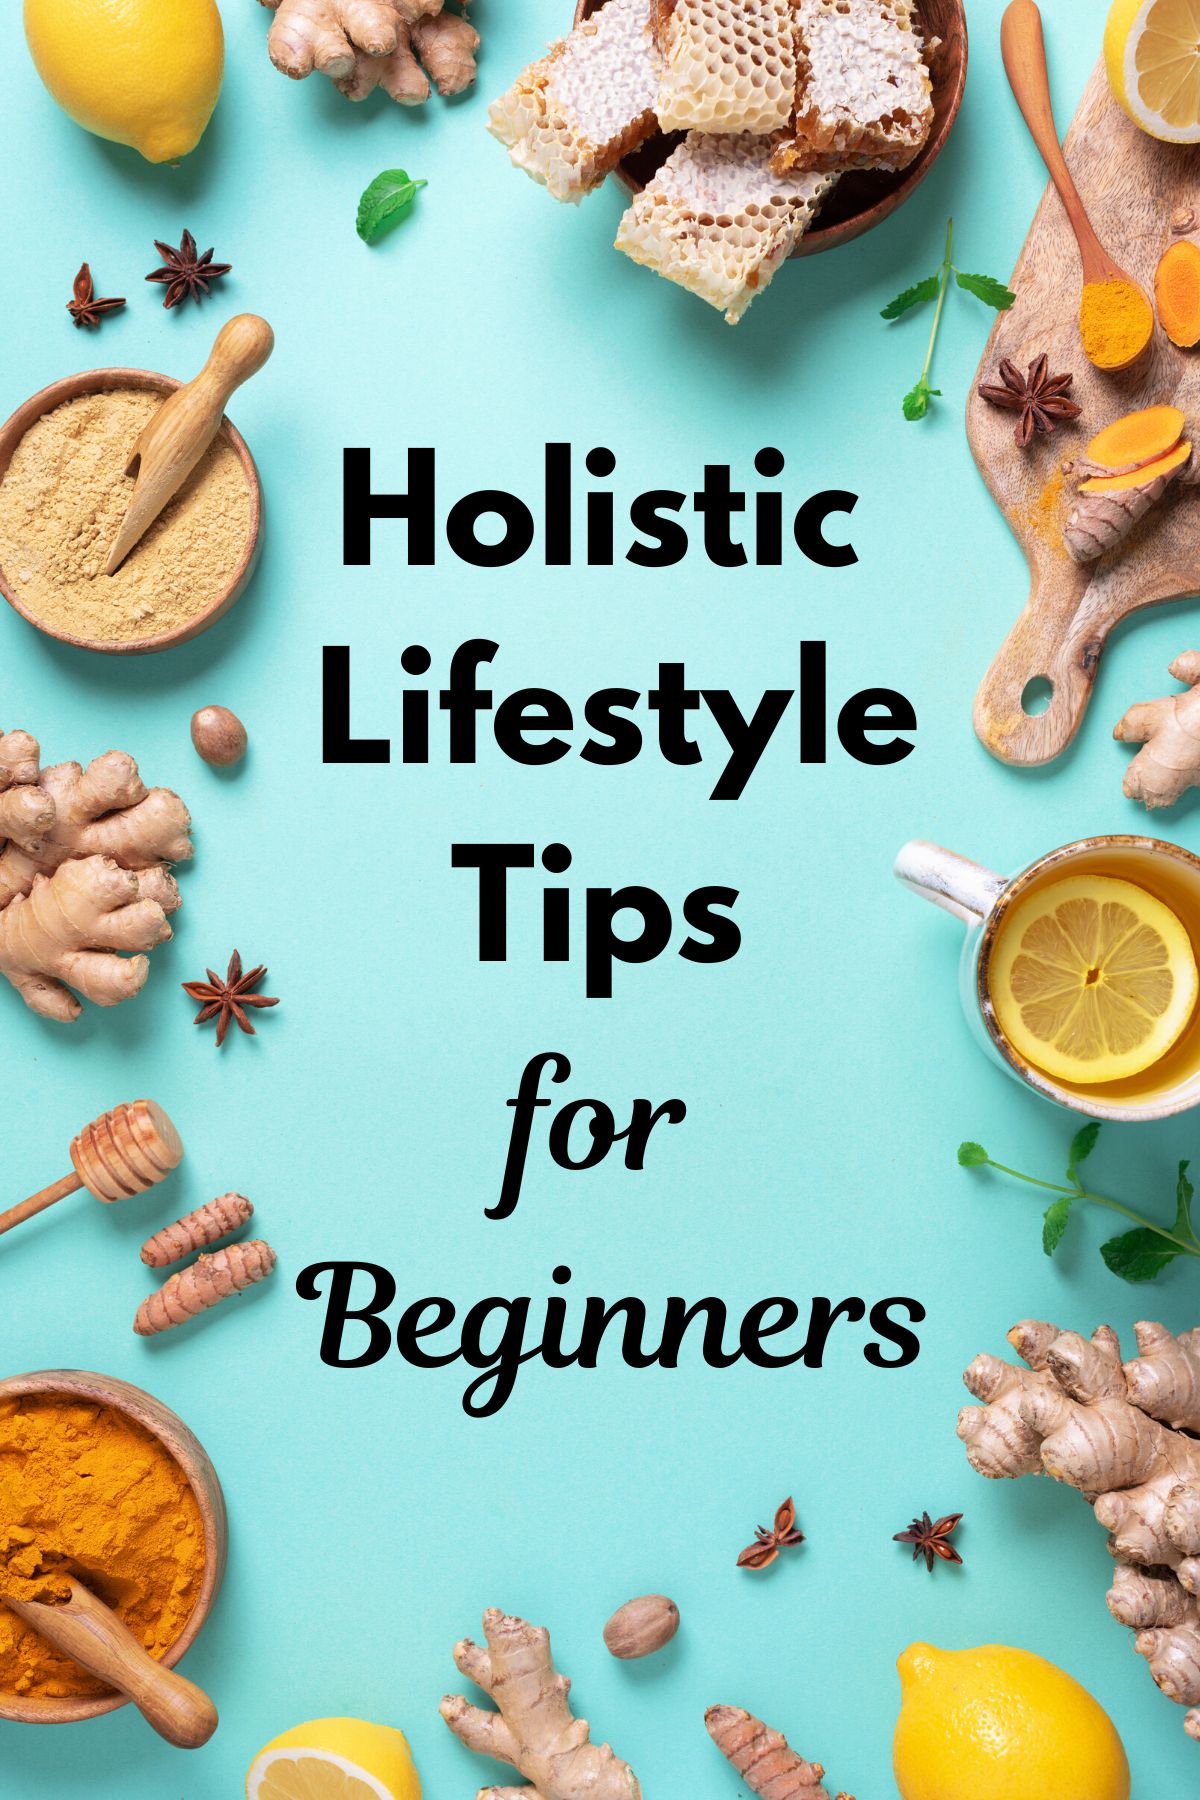 holistic lifestyle tips for beginners infographic.